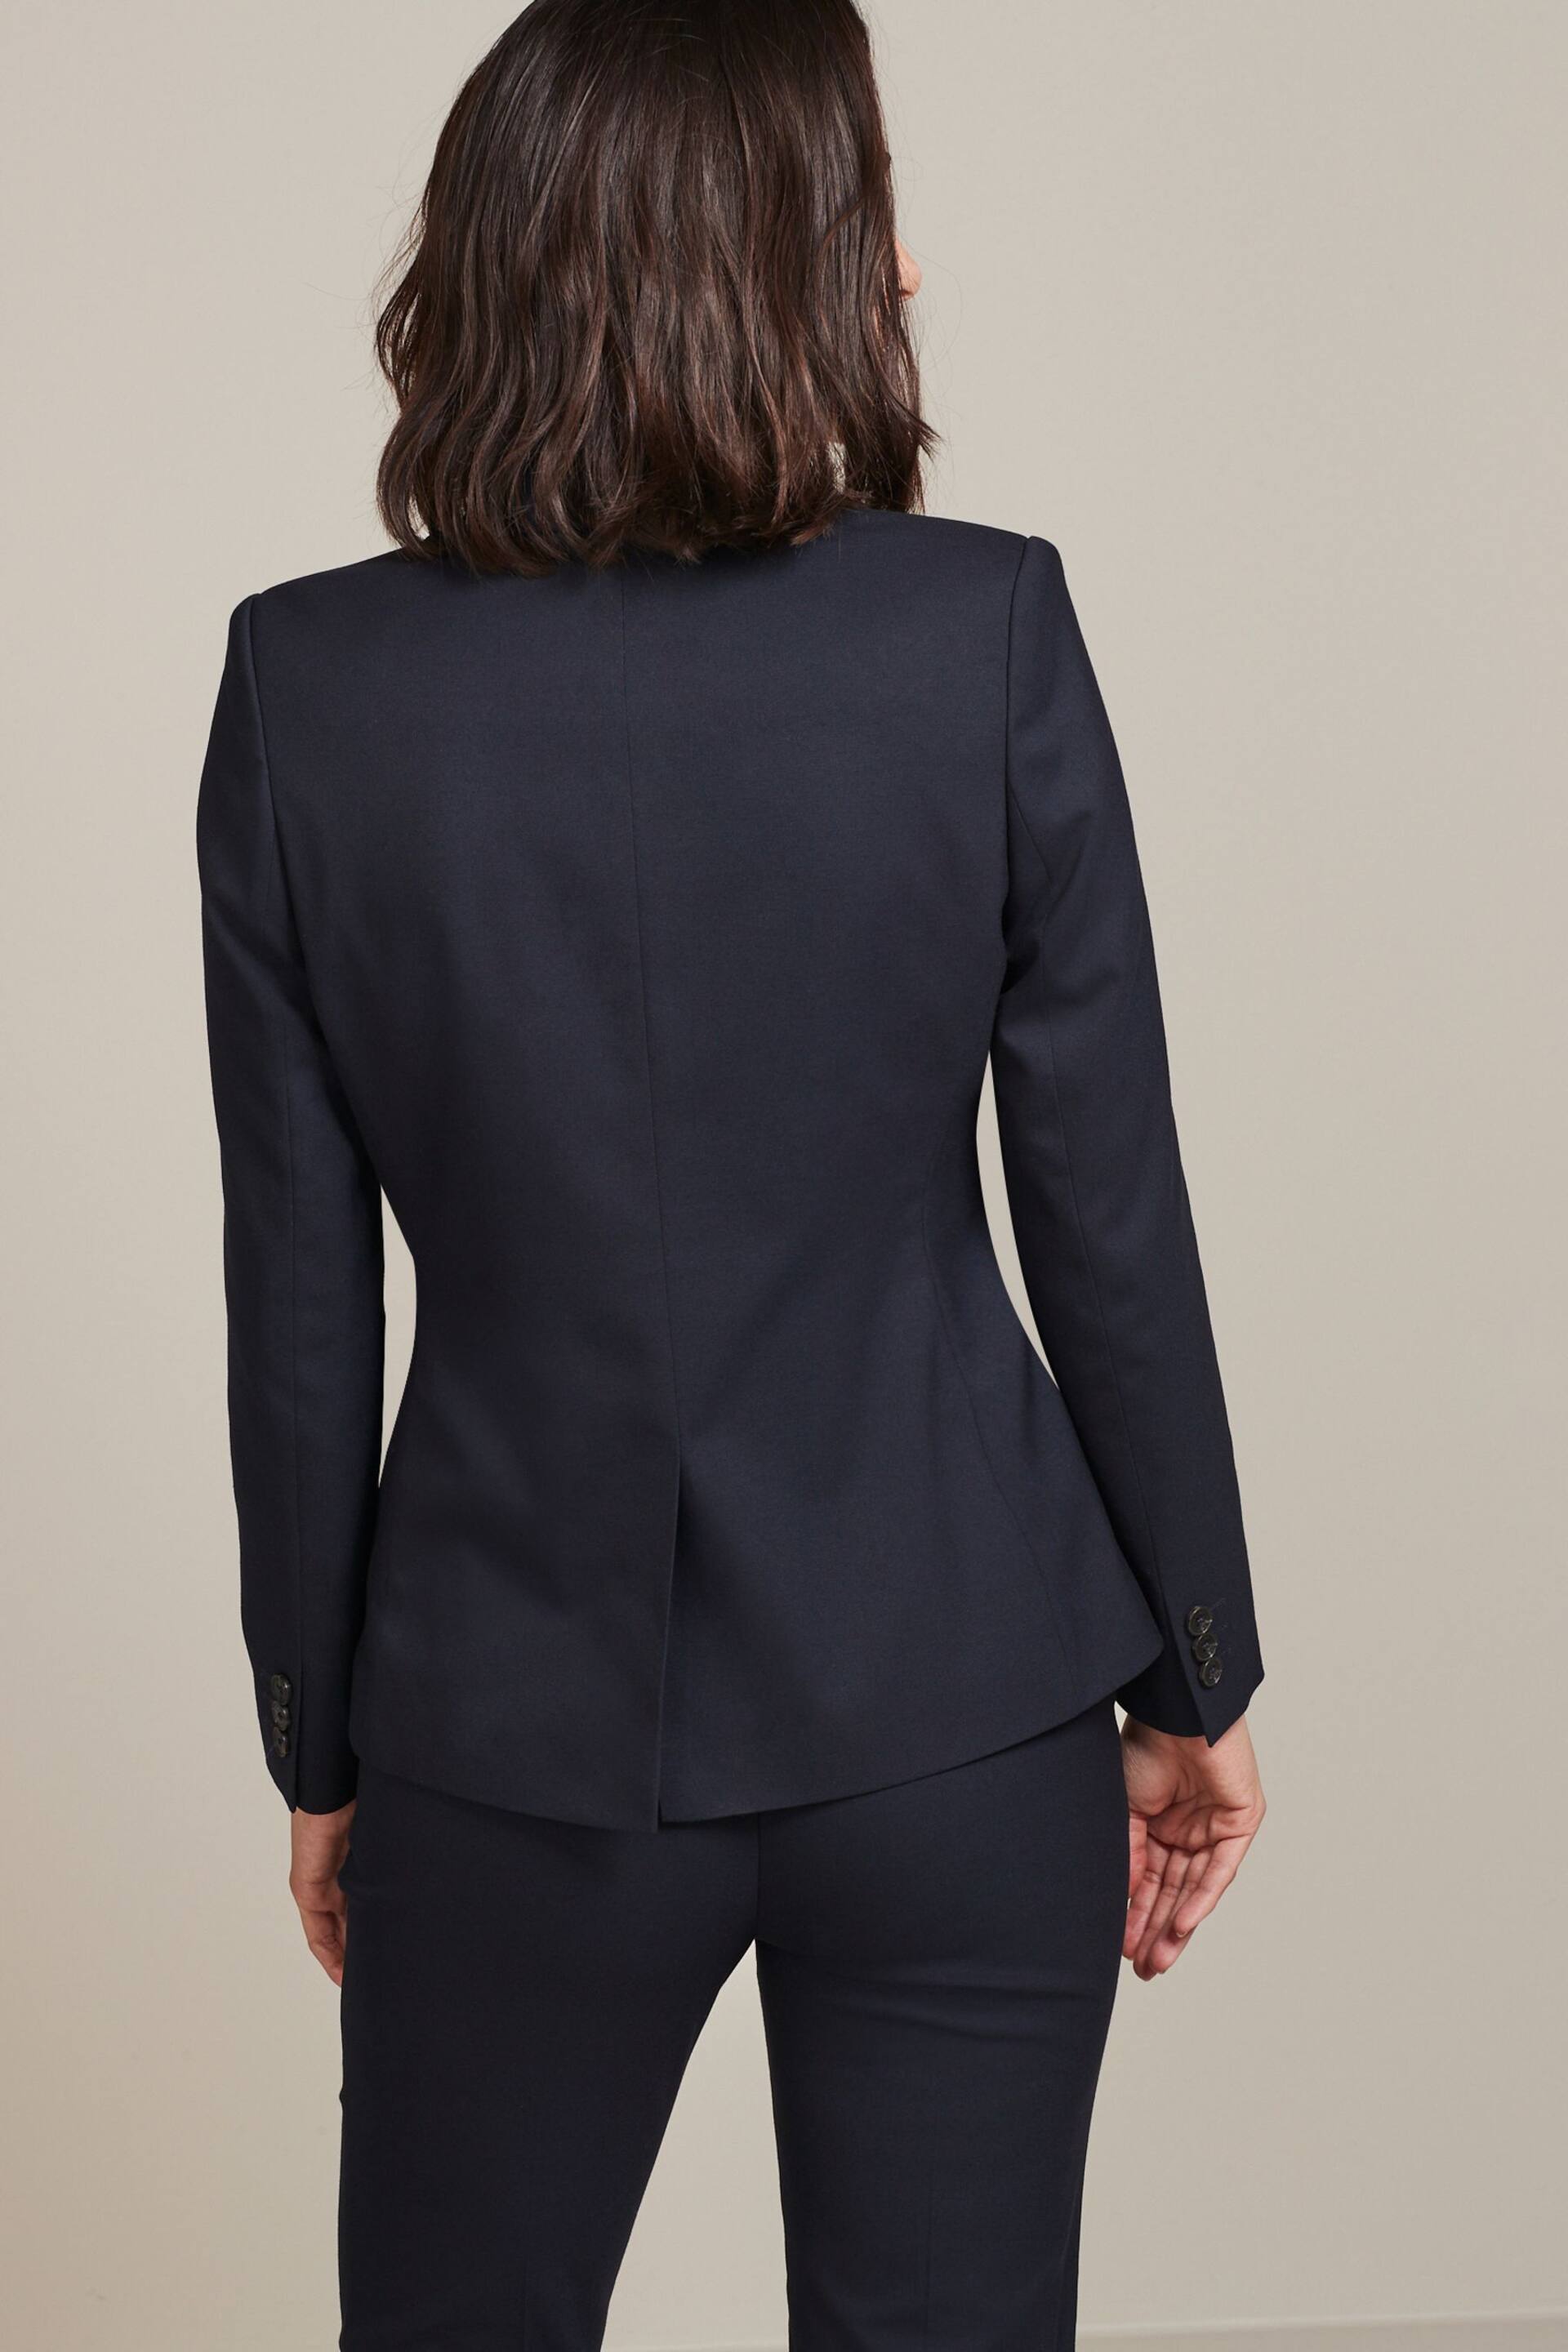 Navy Blue Tailored Single Breasted Jacket - Image 4 of 6